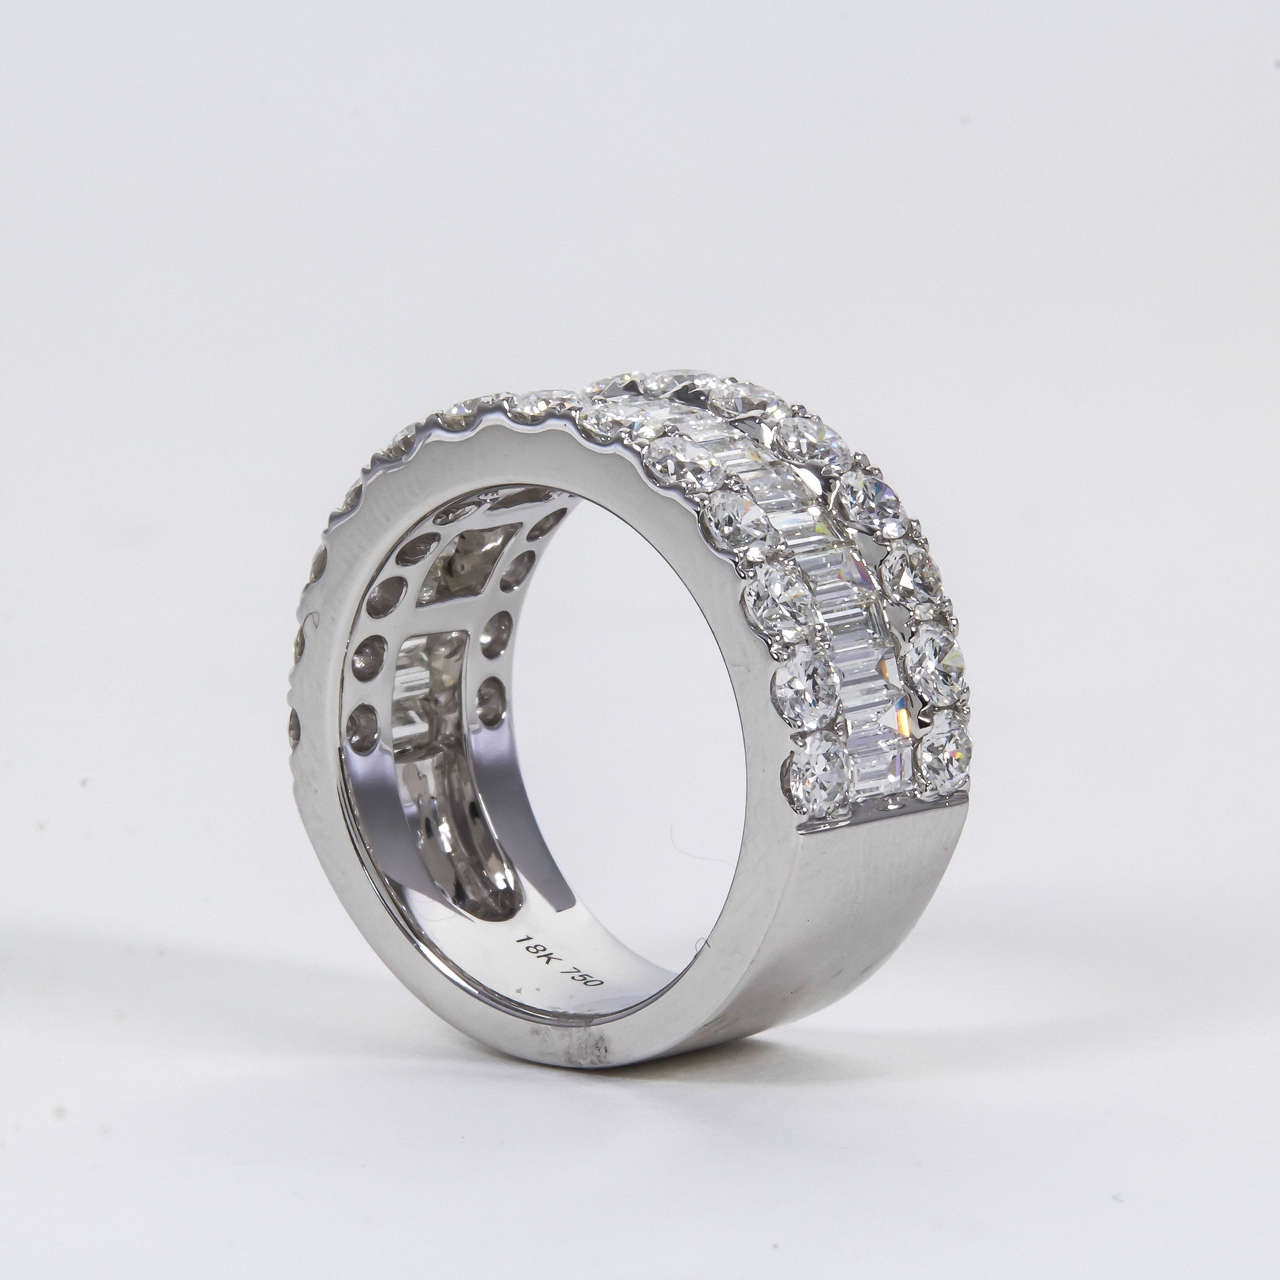 A stunning ring!

3.79 carats of extremely brilliant F/G color VS clarity round and baguette cut diamonds set in 18k white gold.

Approximately 9.5 mm wide.

Currently a size 6.5 — can be sized to any finger size. 

A perfect band for everyday or